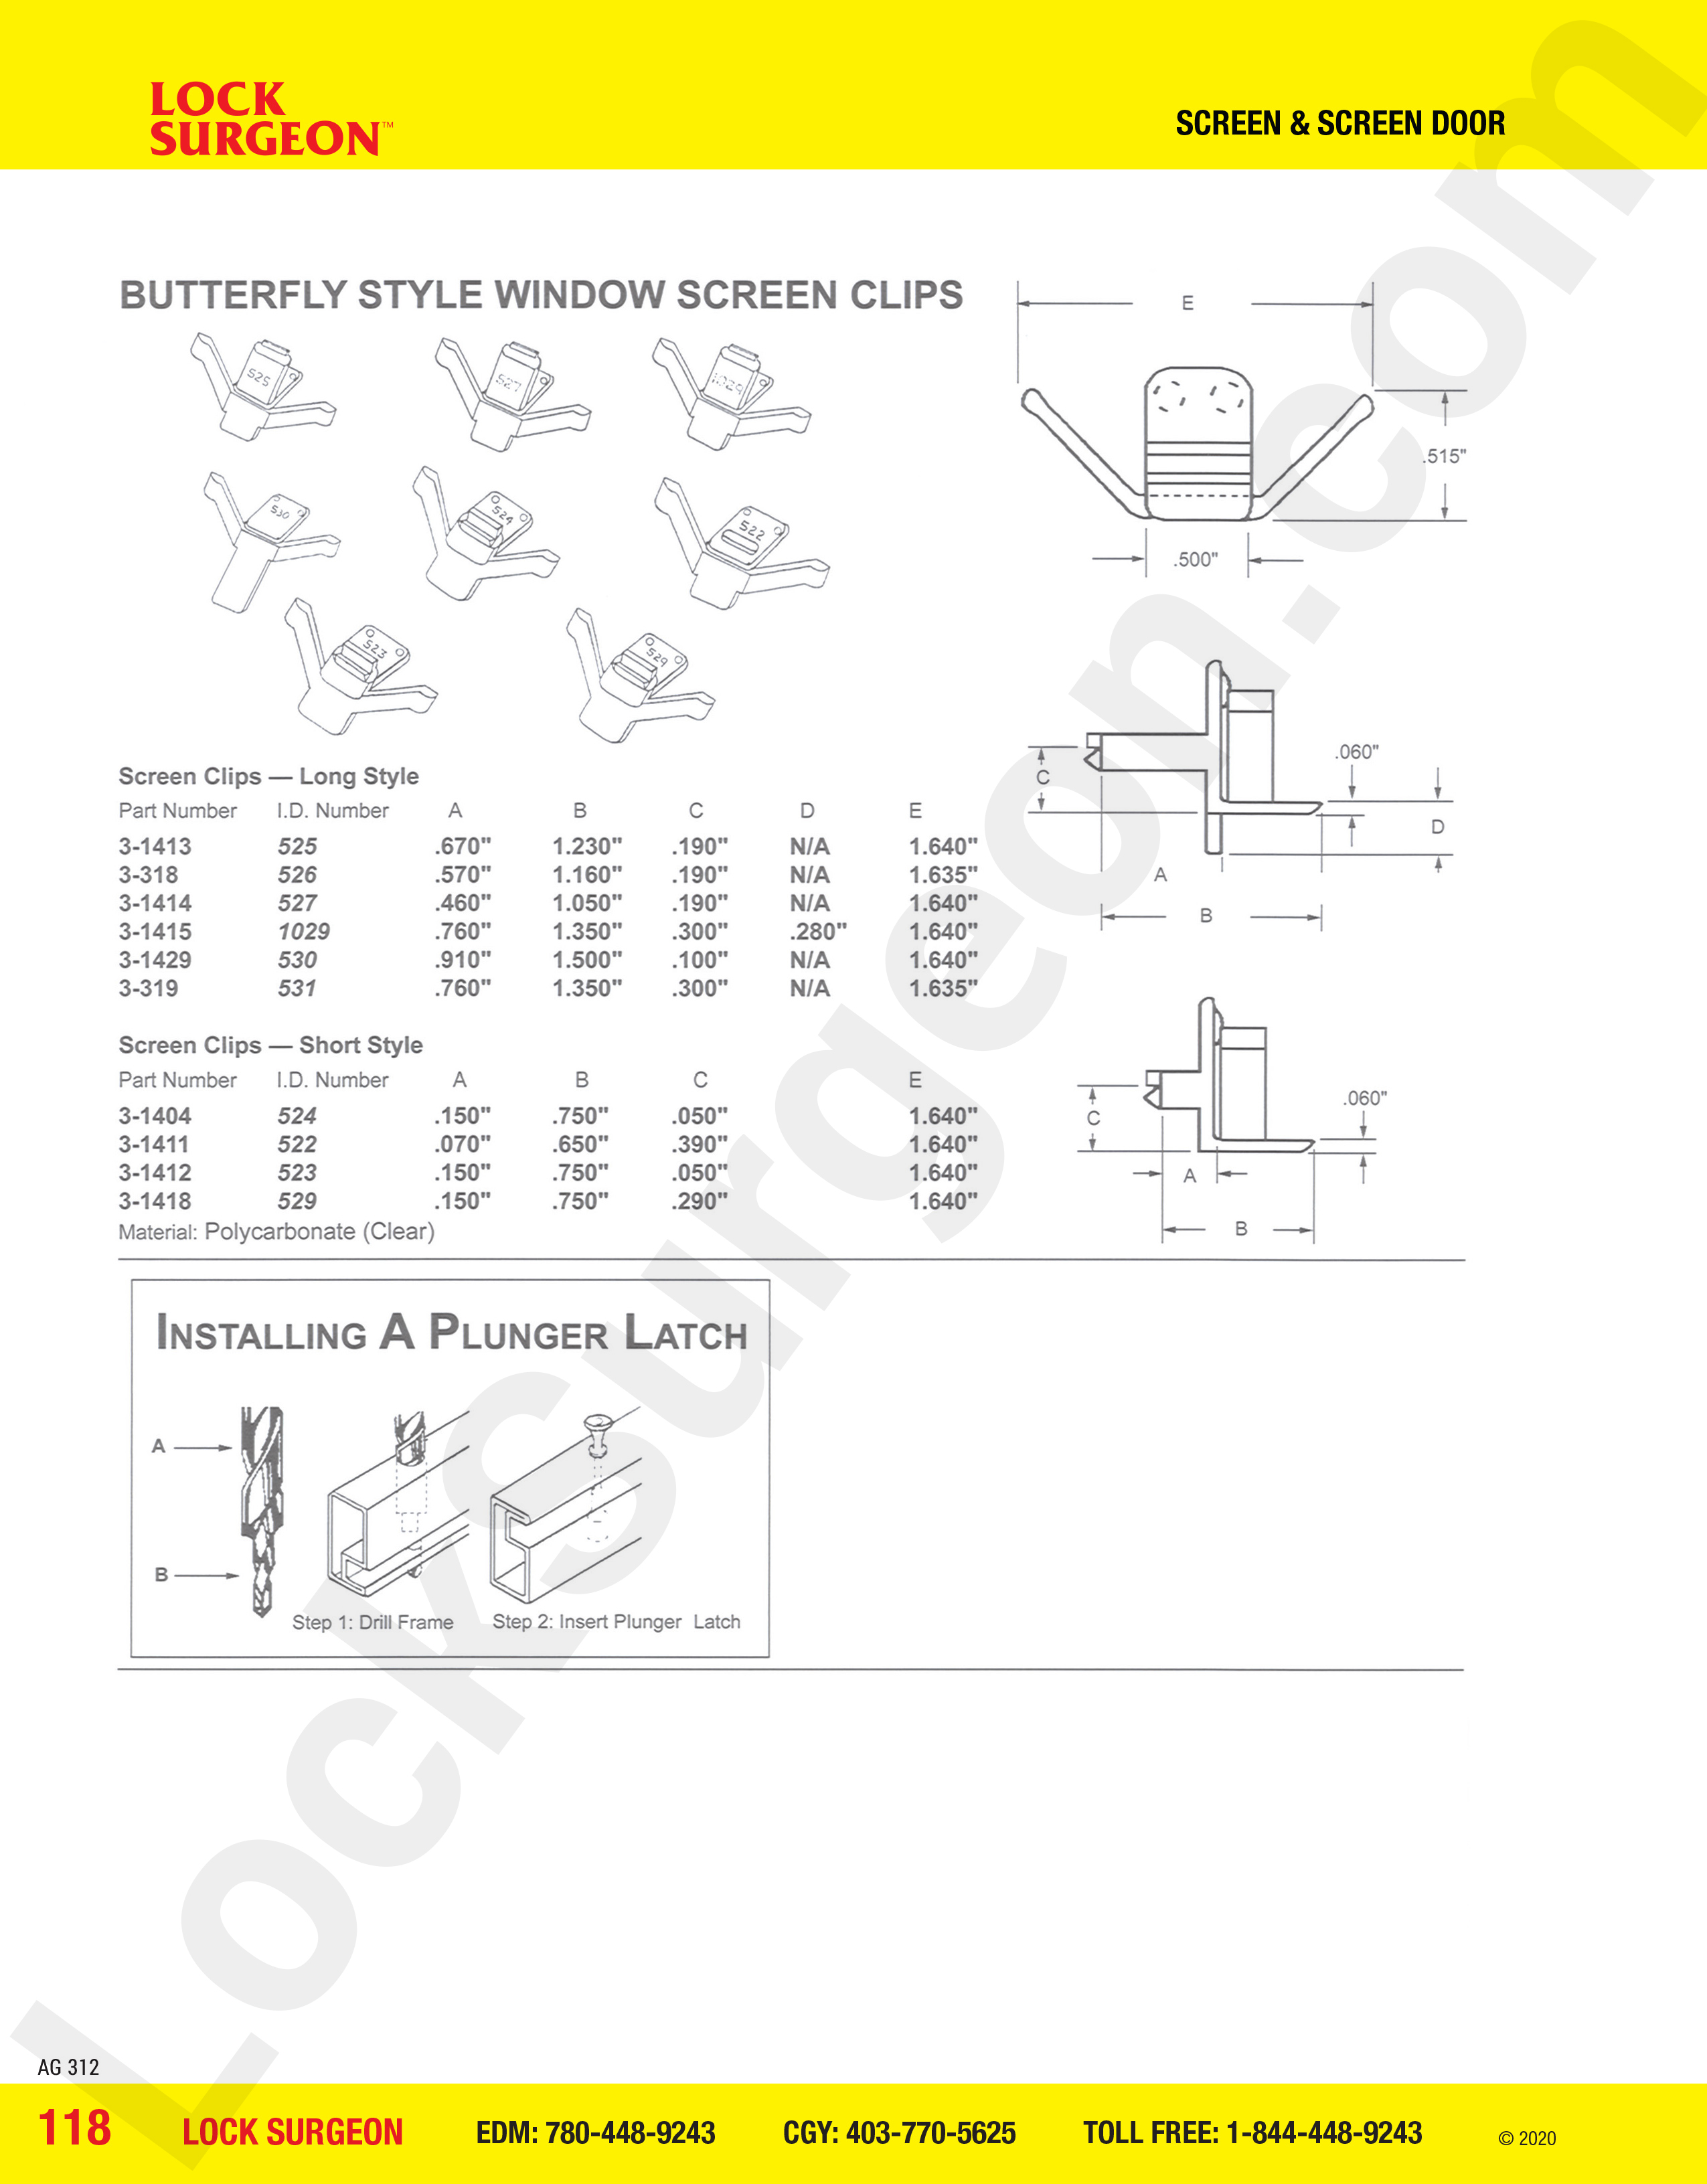 Screen clips - butterfly style window screen clips, long-style and short-style at Lock Surgeon.